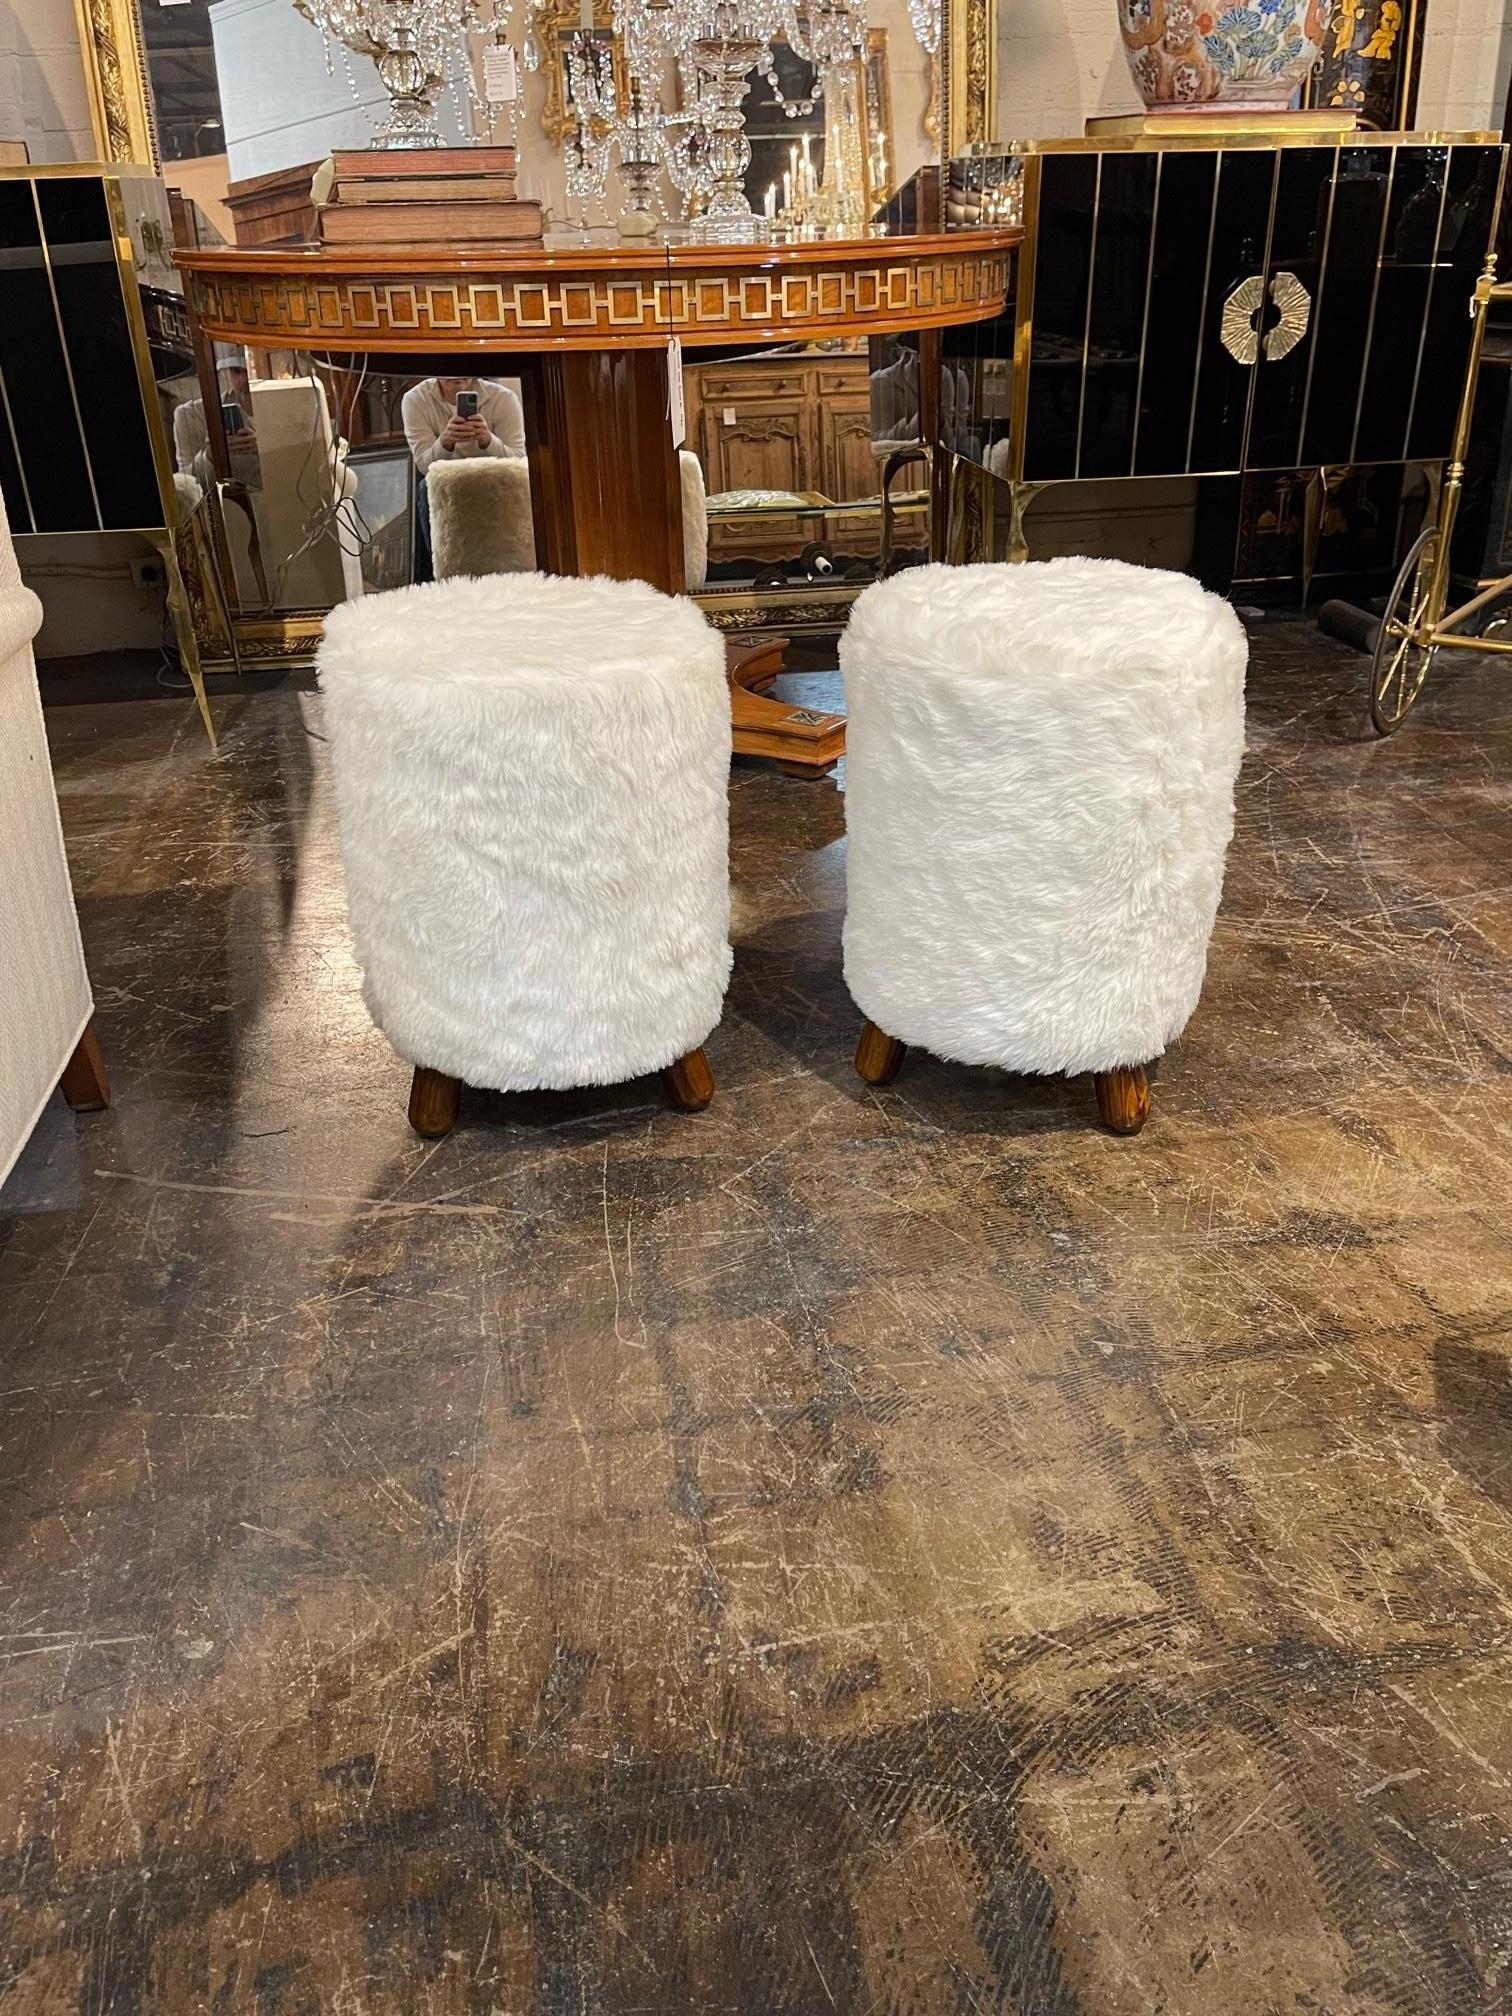 Pair of modern Italian Sherpa stools, Circa 2000. A fine addition to any home.